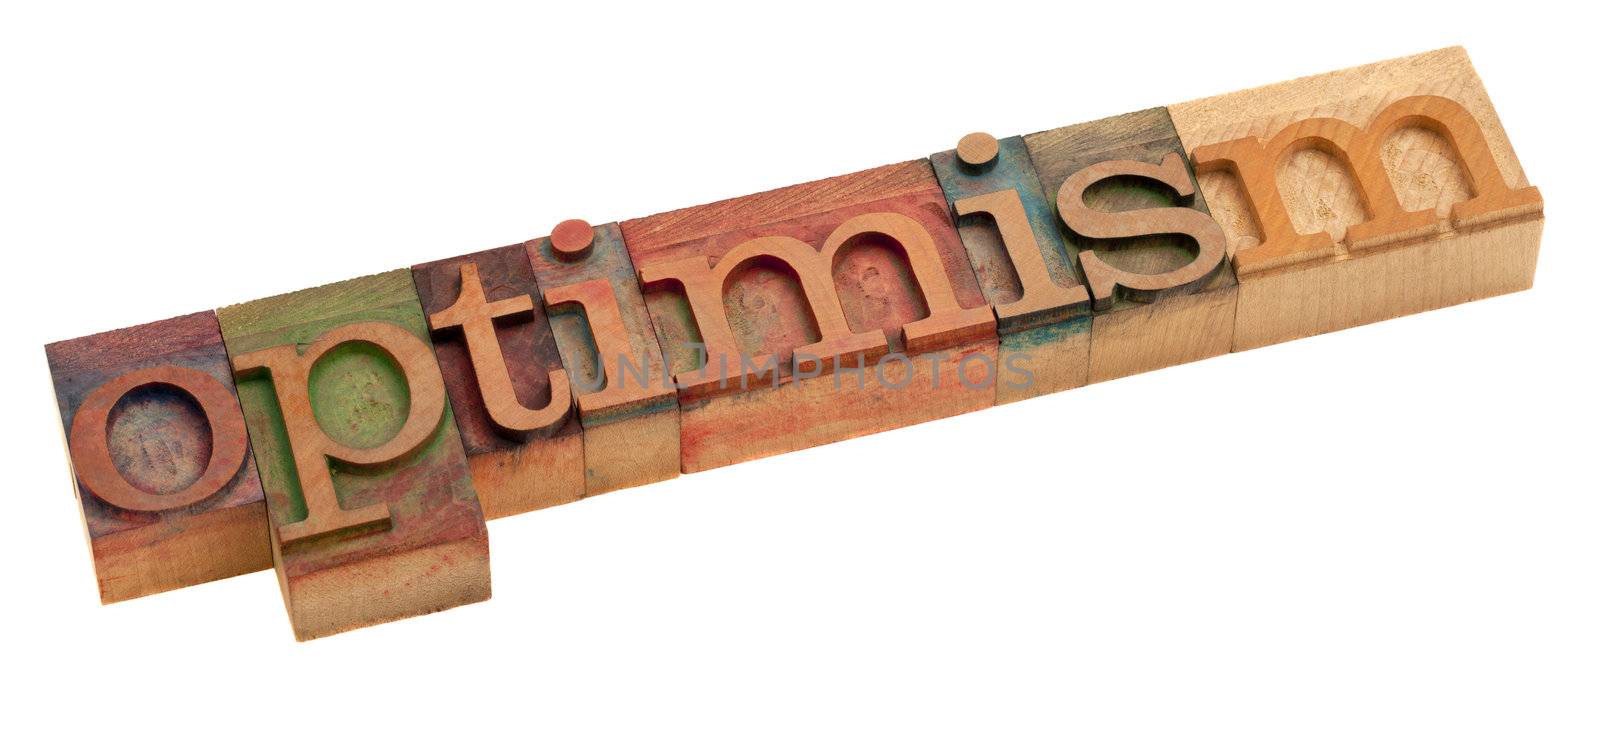 optimism word in vintage wooden letterpress printing blocks, stained by color inks, isolated on white